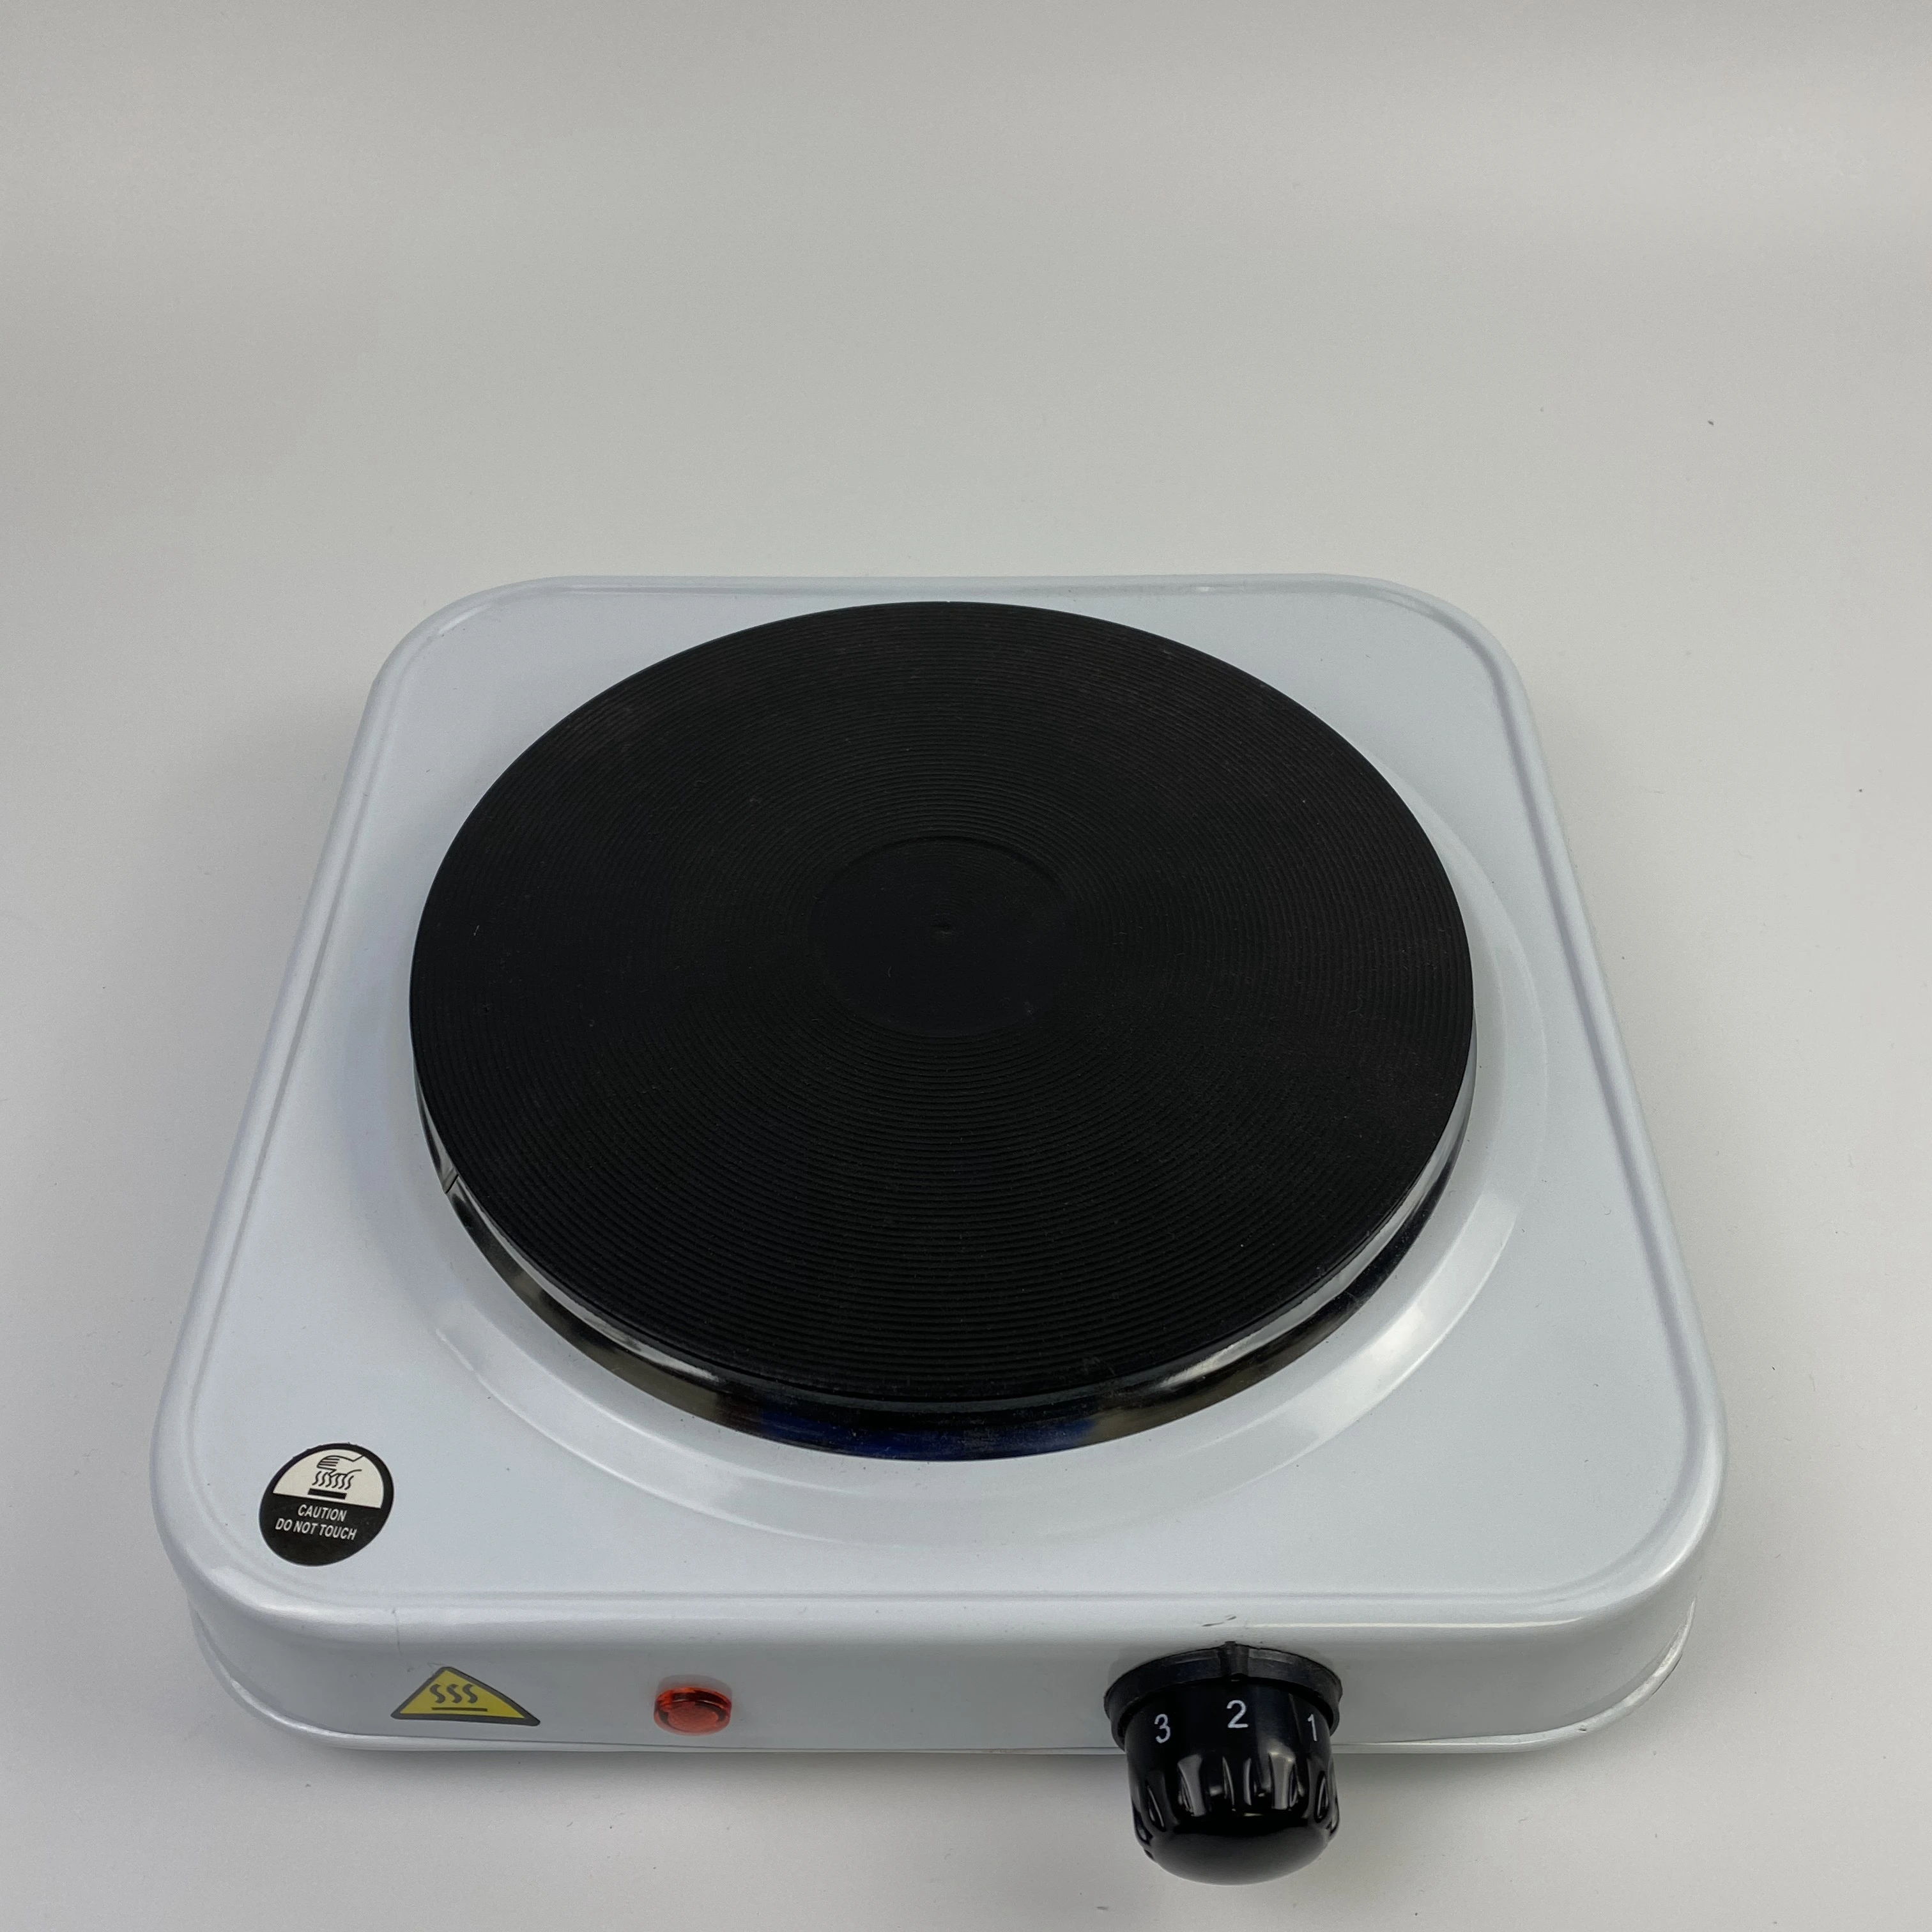 Widely used superior quality electric hot plate portable digital hot plate